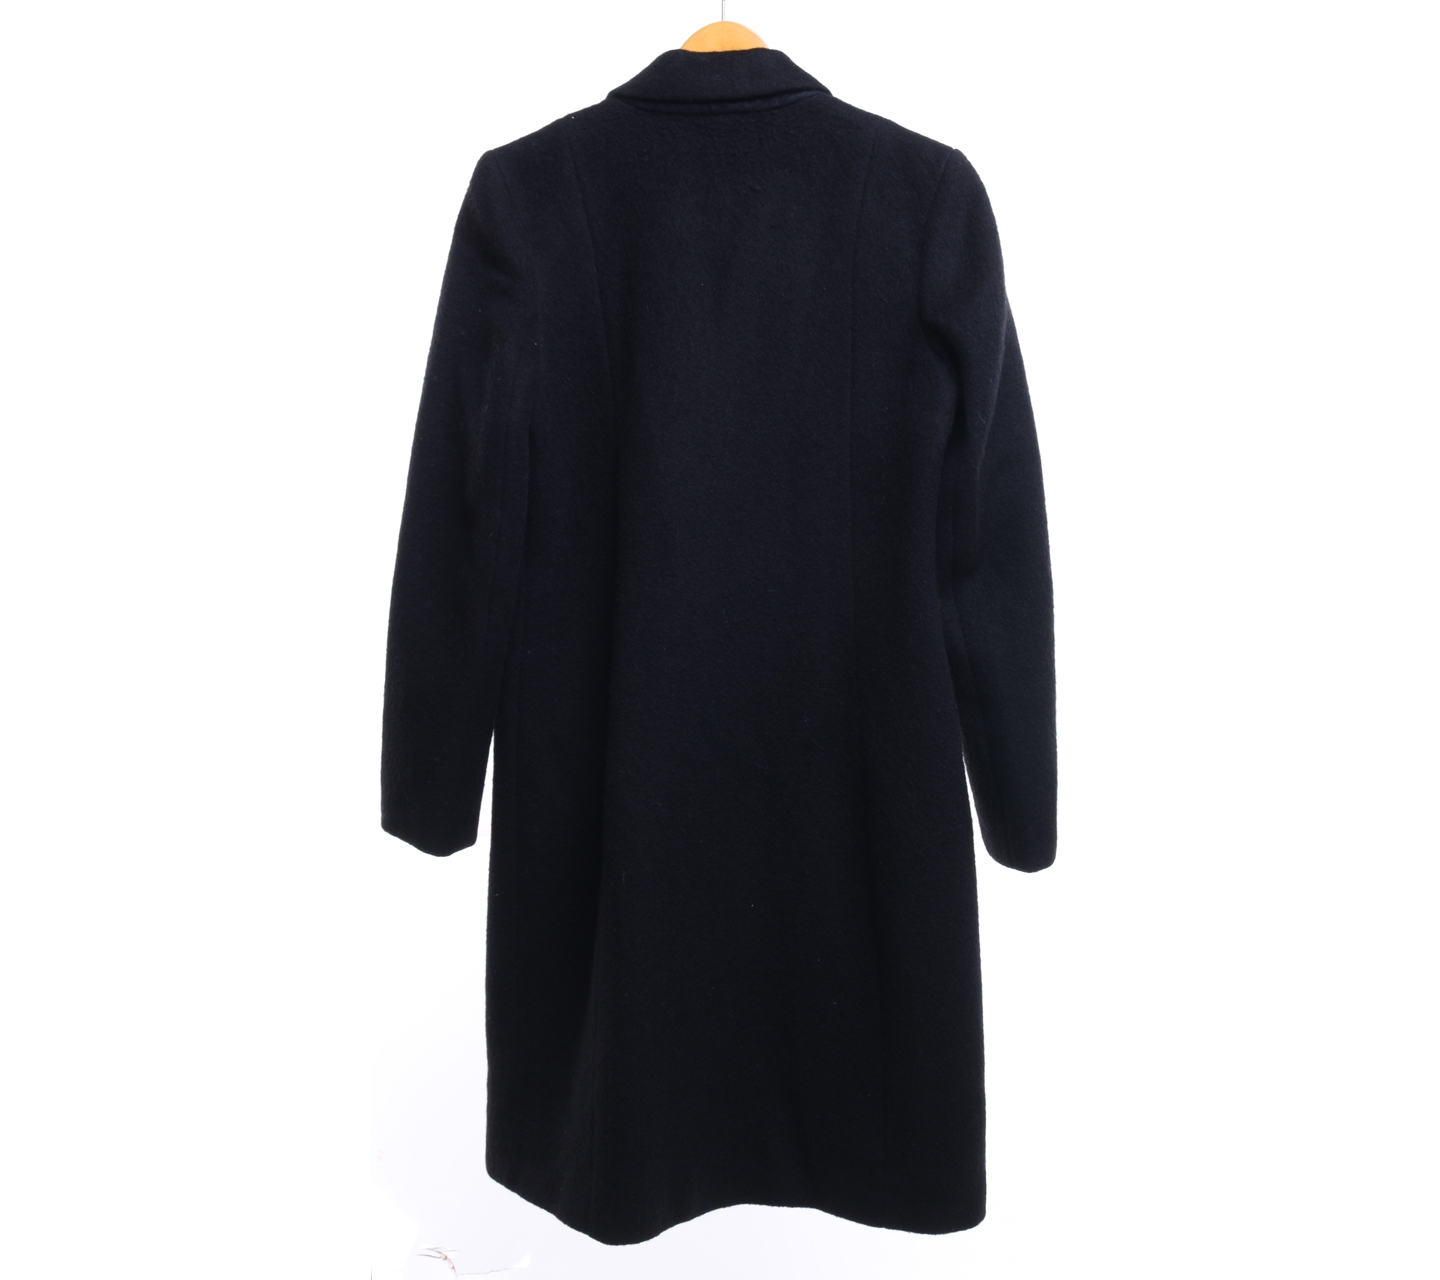 The Limited Black Coat